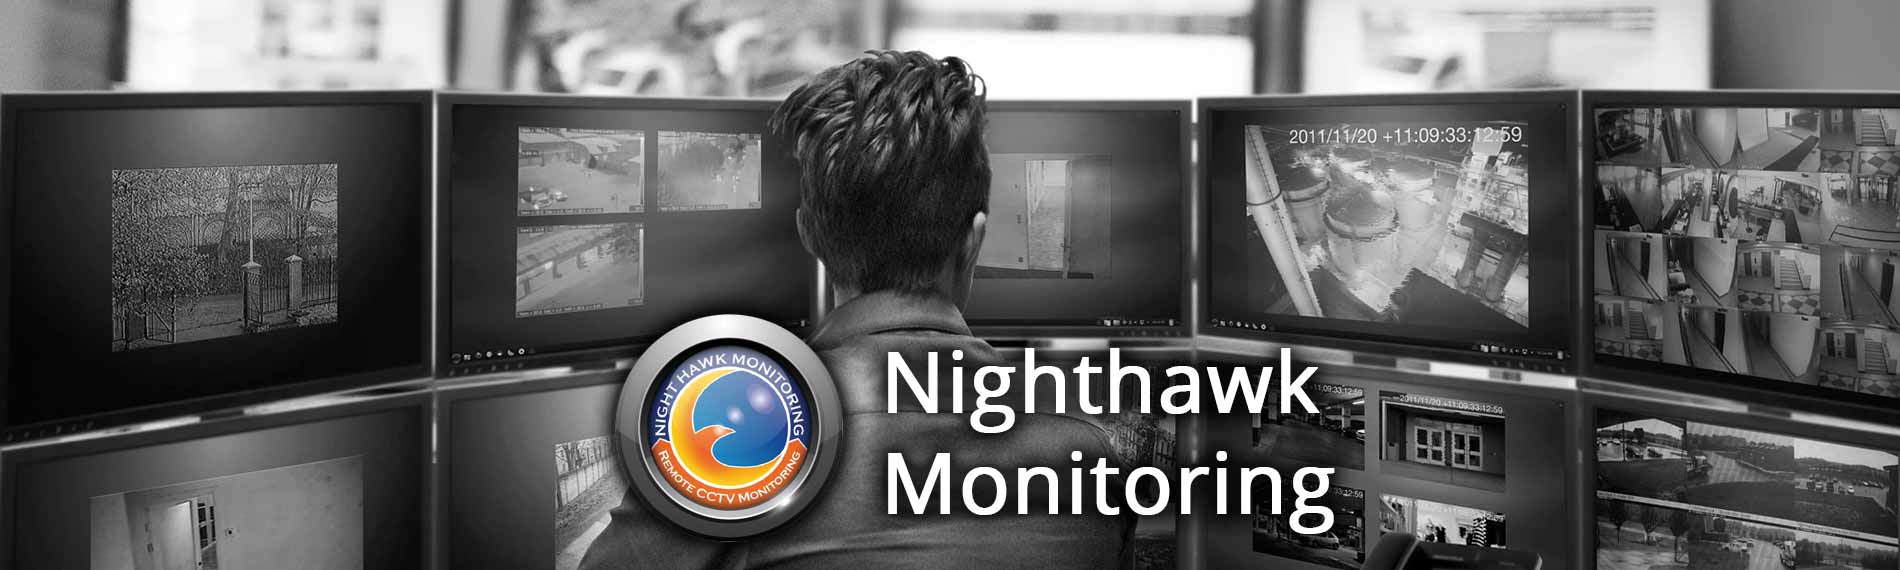 RALEIGH REMOTE VIDEO SURVEILLANCE SECURITY CAMERAS MONITORING SYSTEM SERVICES COMPANY RALEIGH NORTH CAROLINA